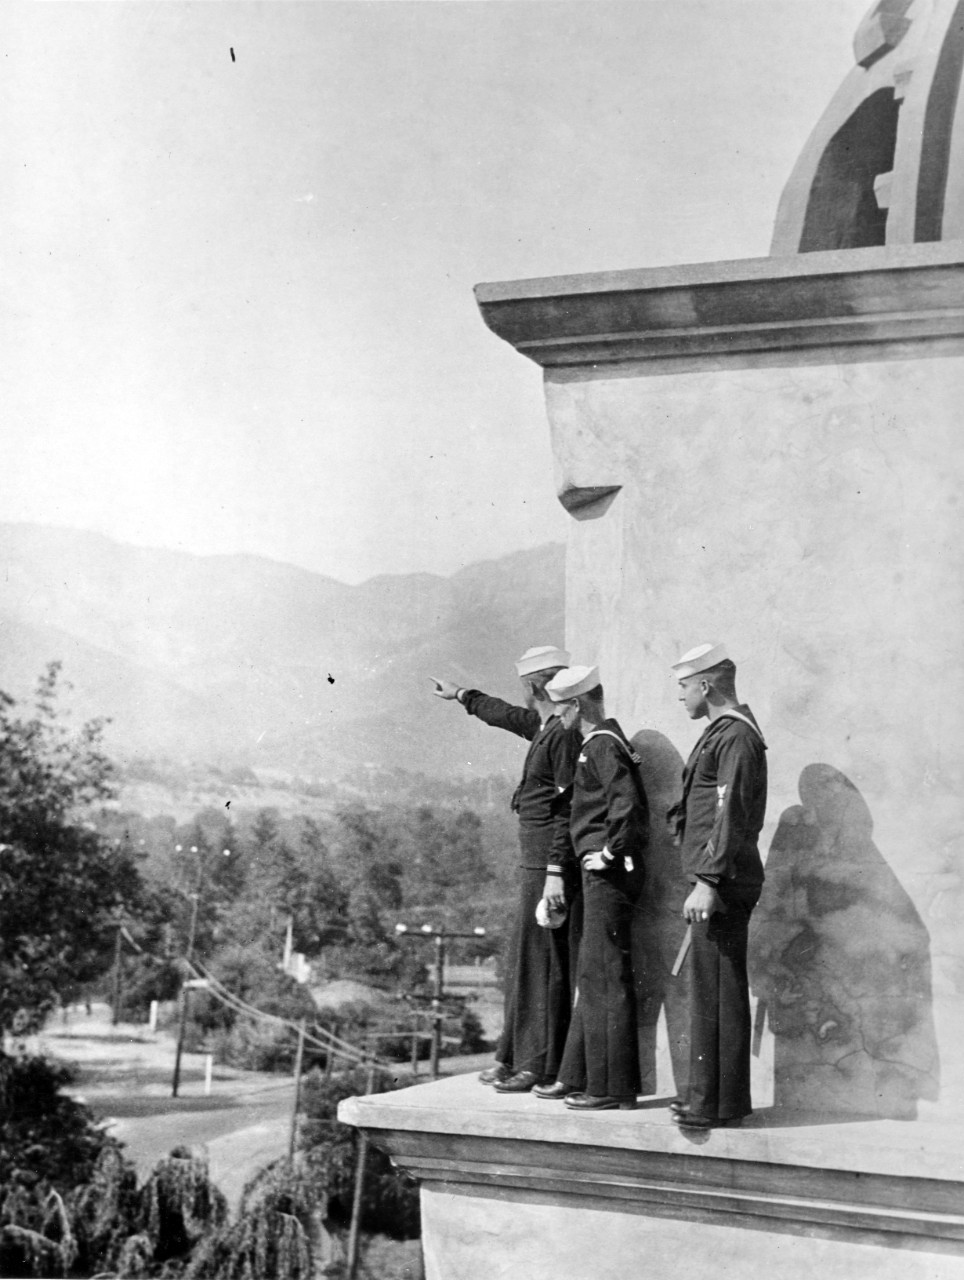 Men from the Pacific Fleet visiting the Santa Barbara Mission